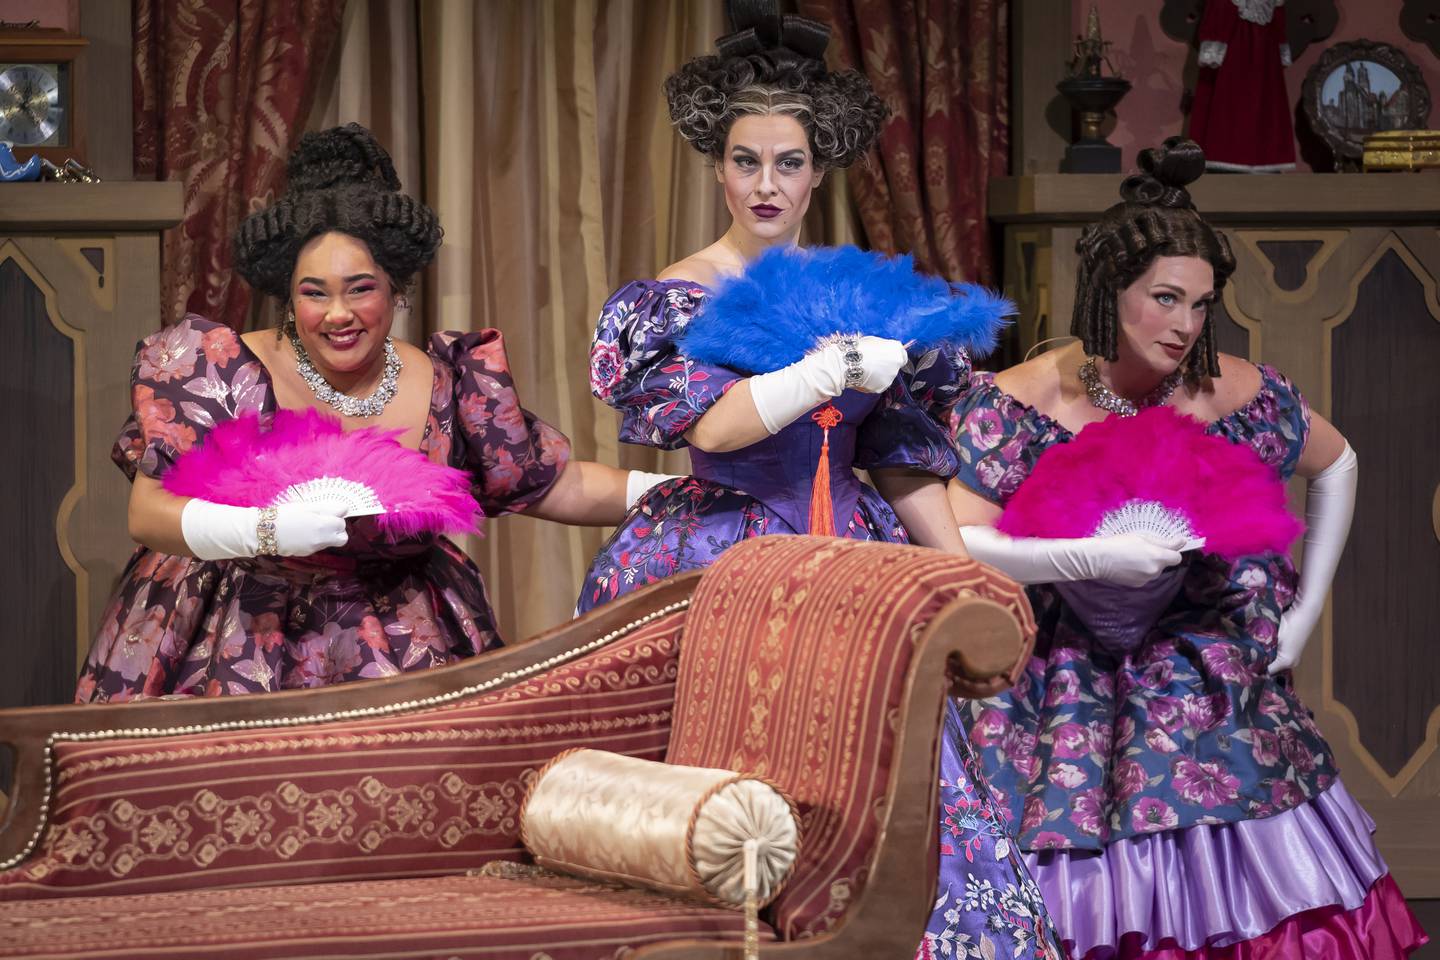 Sarah Bockel (center) plays Cinderella’s evil stepmother, with Tiffany T. Taylor (left) as stepsister Joy, and Jacquelyne Jones playing stepsister Grace in Paramount Theatre’s "Cinderella."